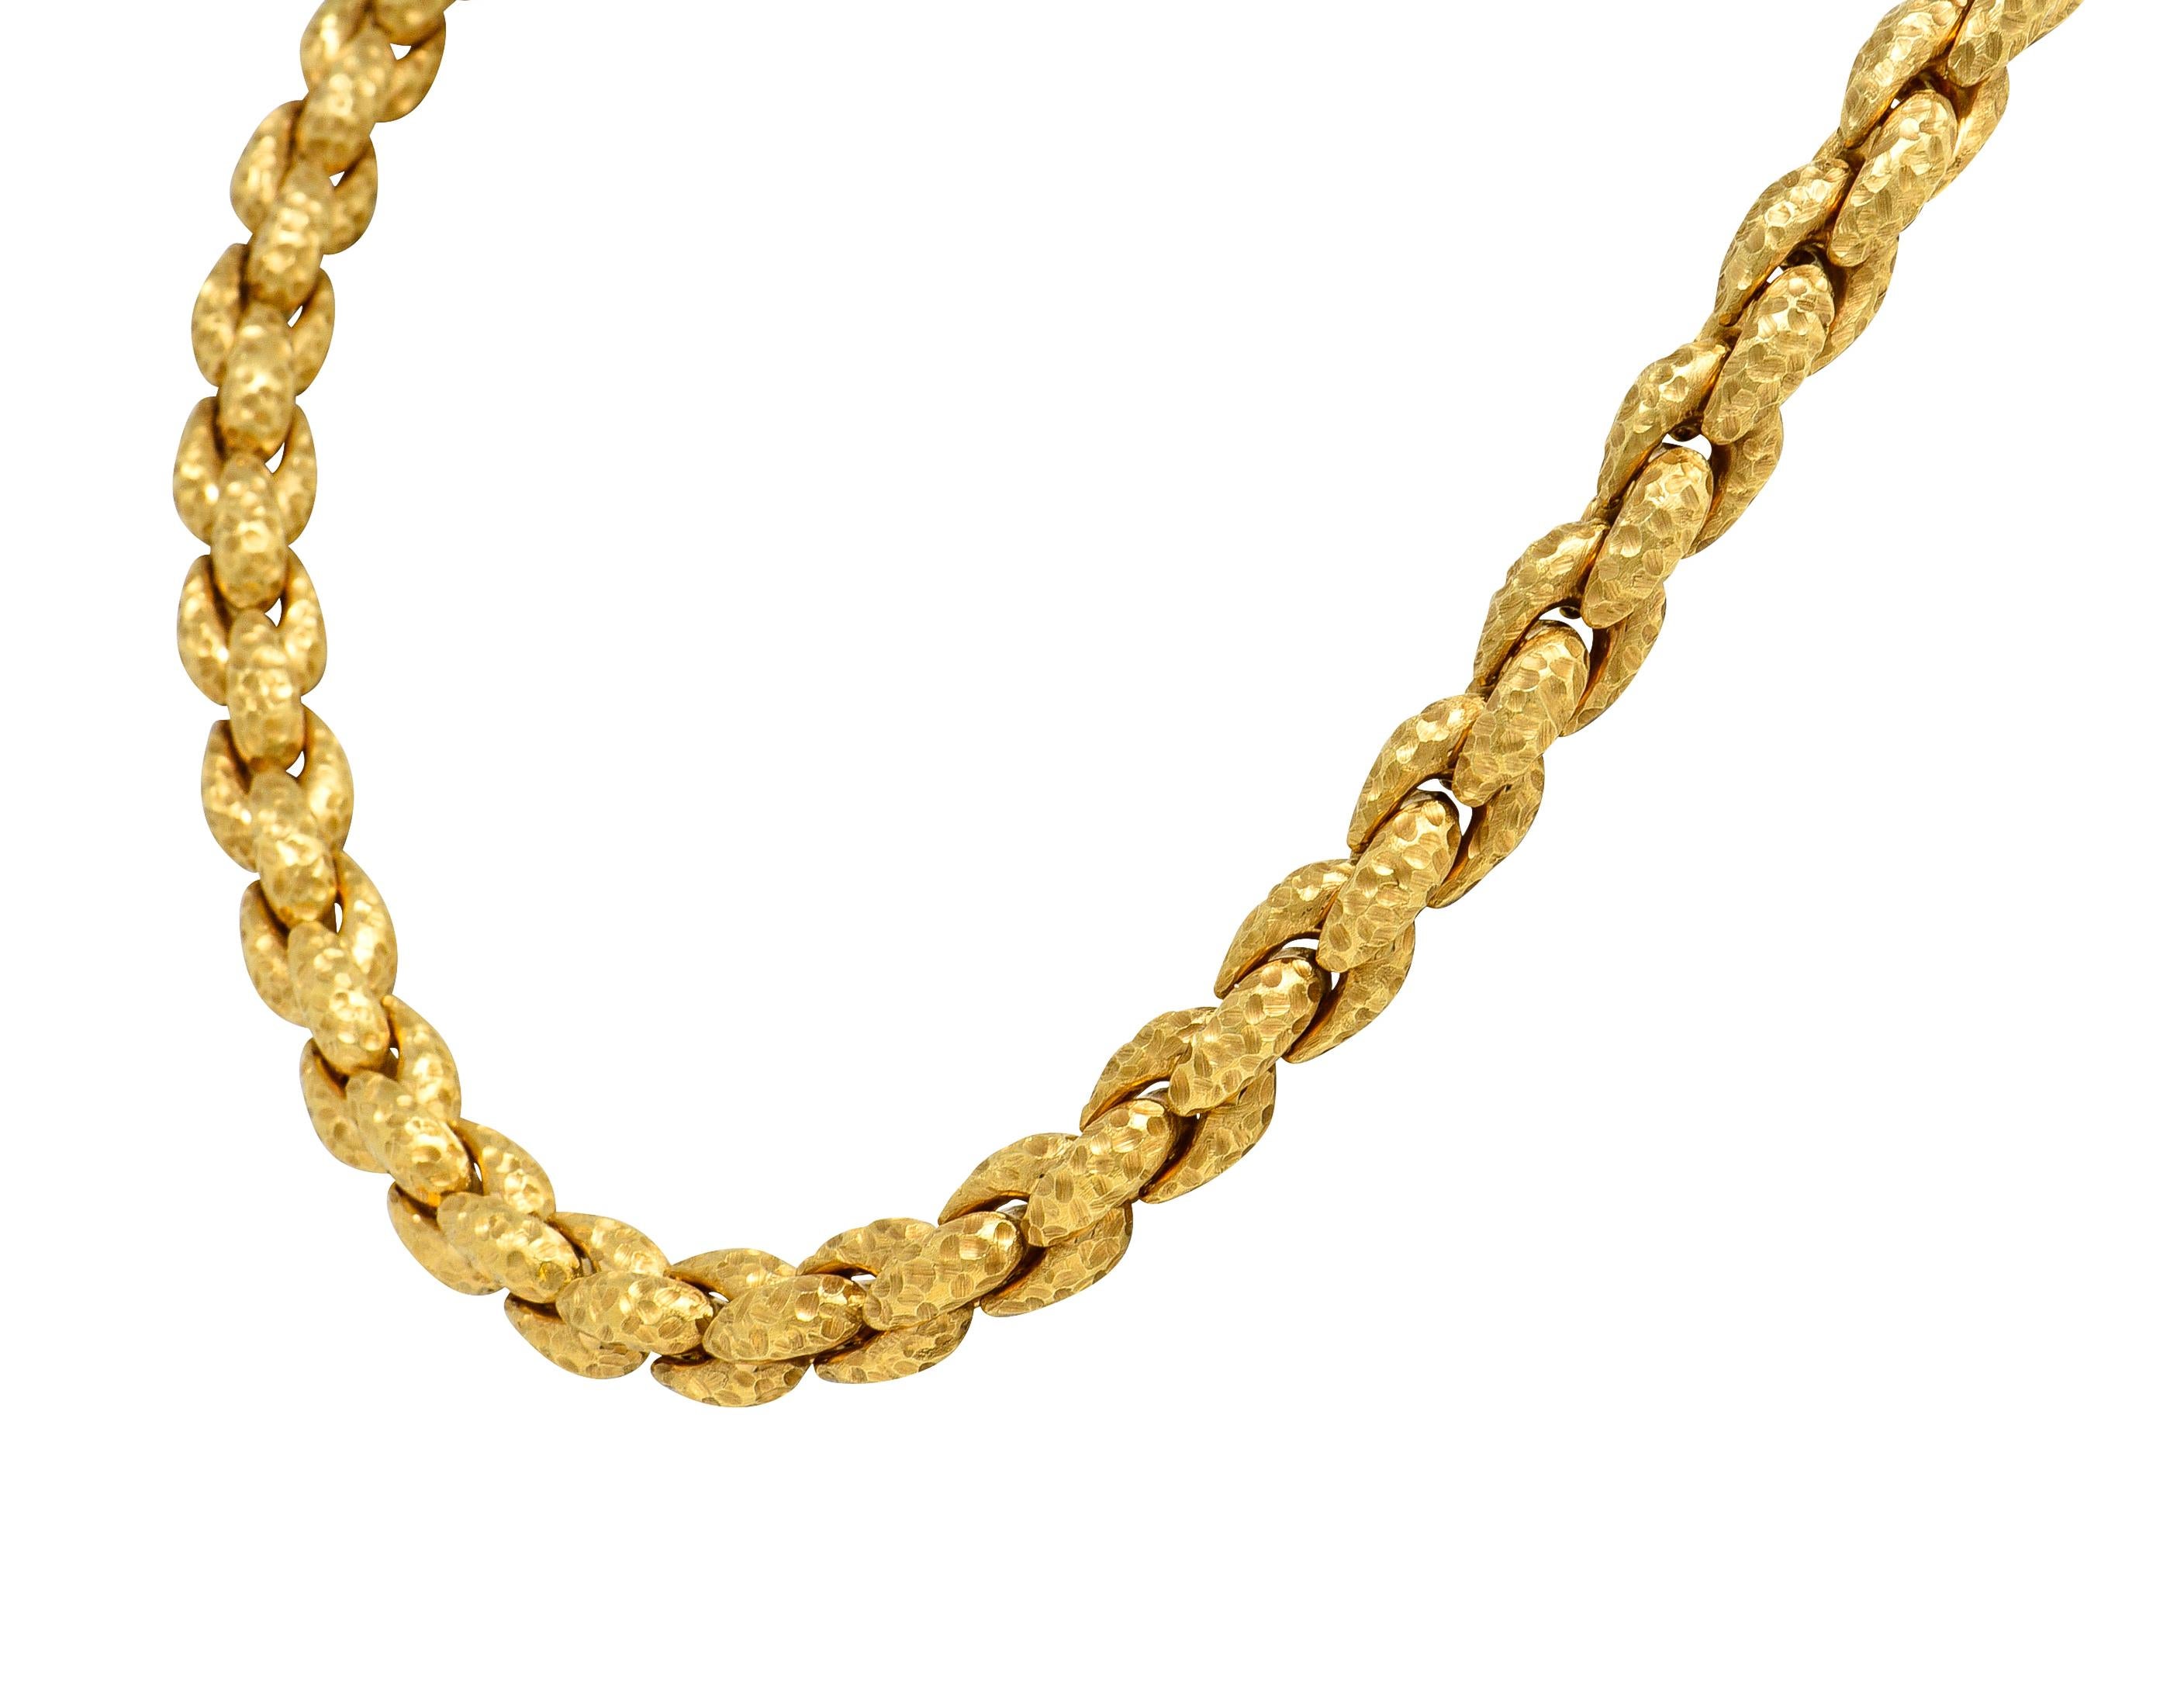 Brilliant Cut 1980s Diamond 18 Karat Yellow Gold Hammered Cable Chain Vintage Necklace